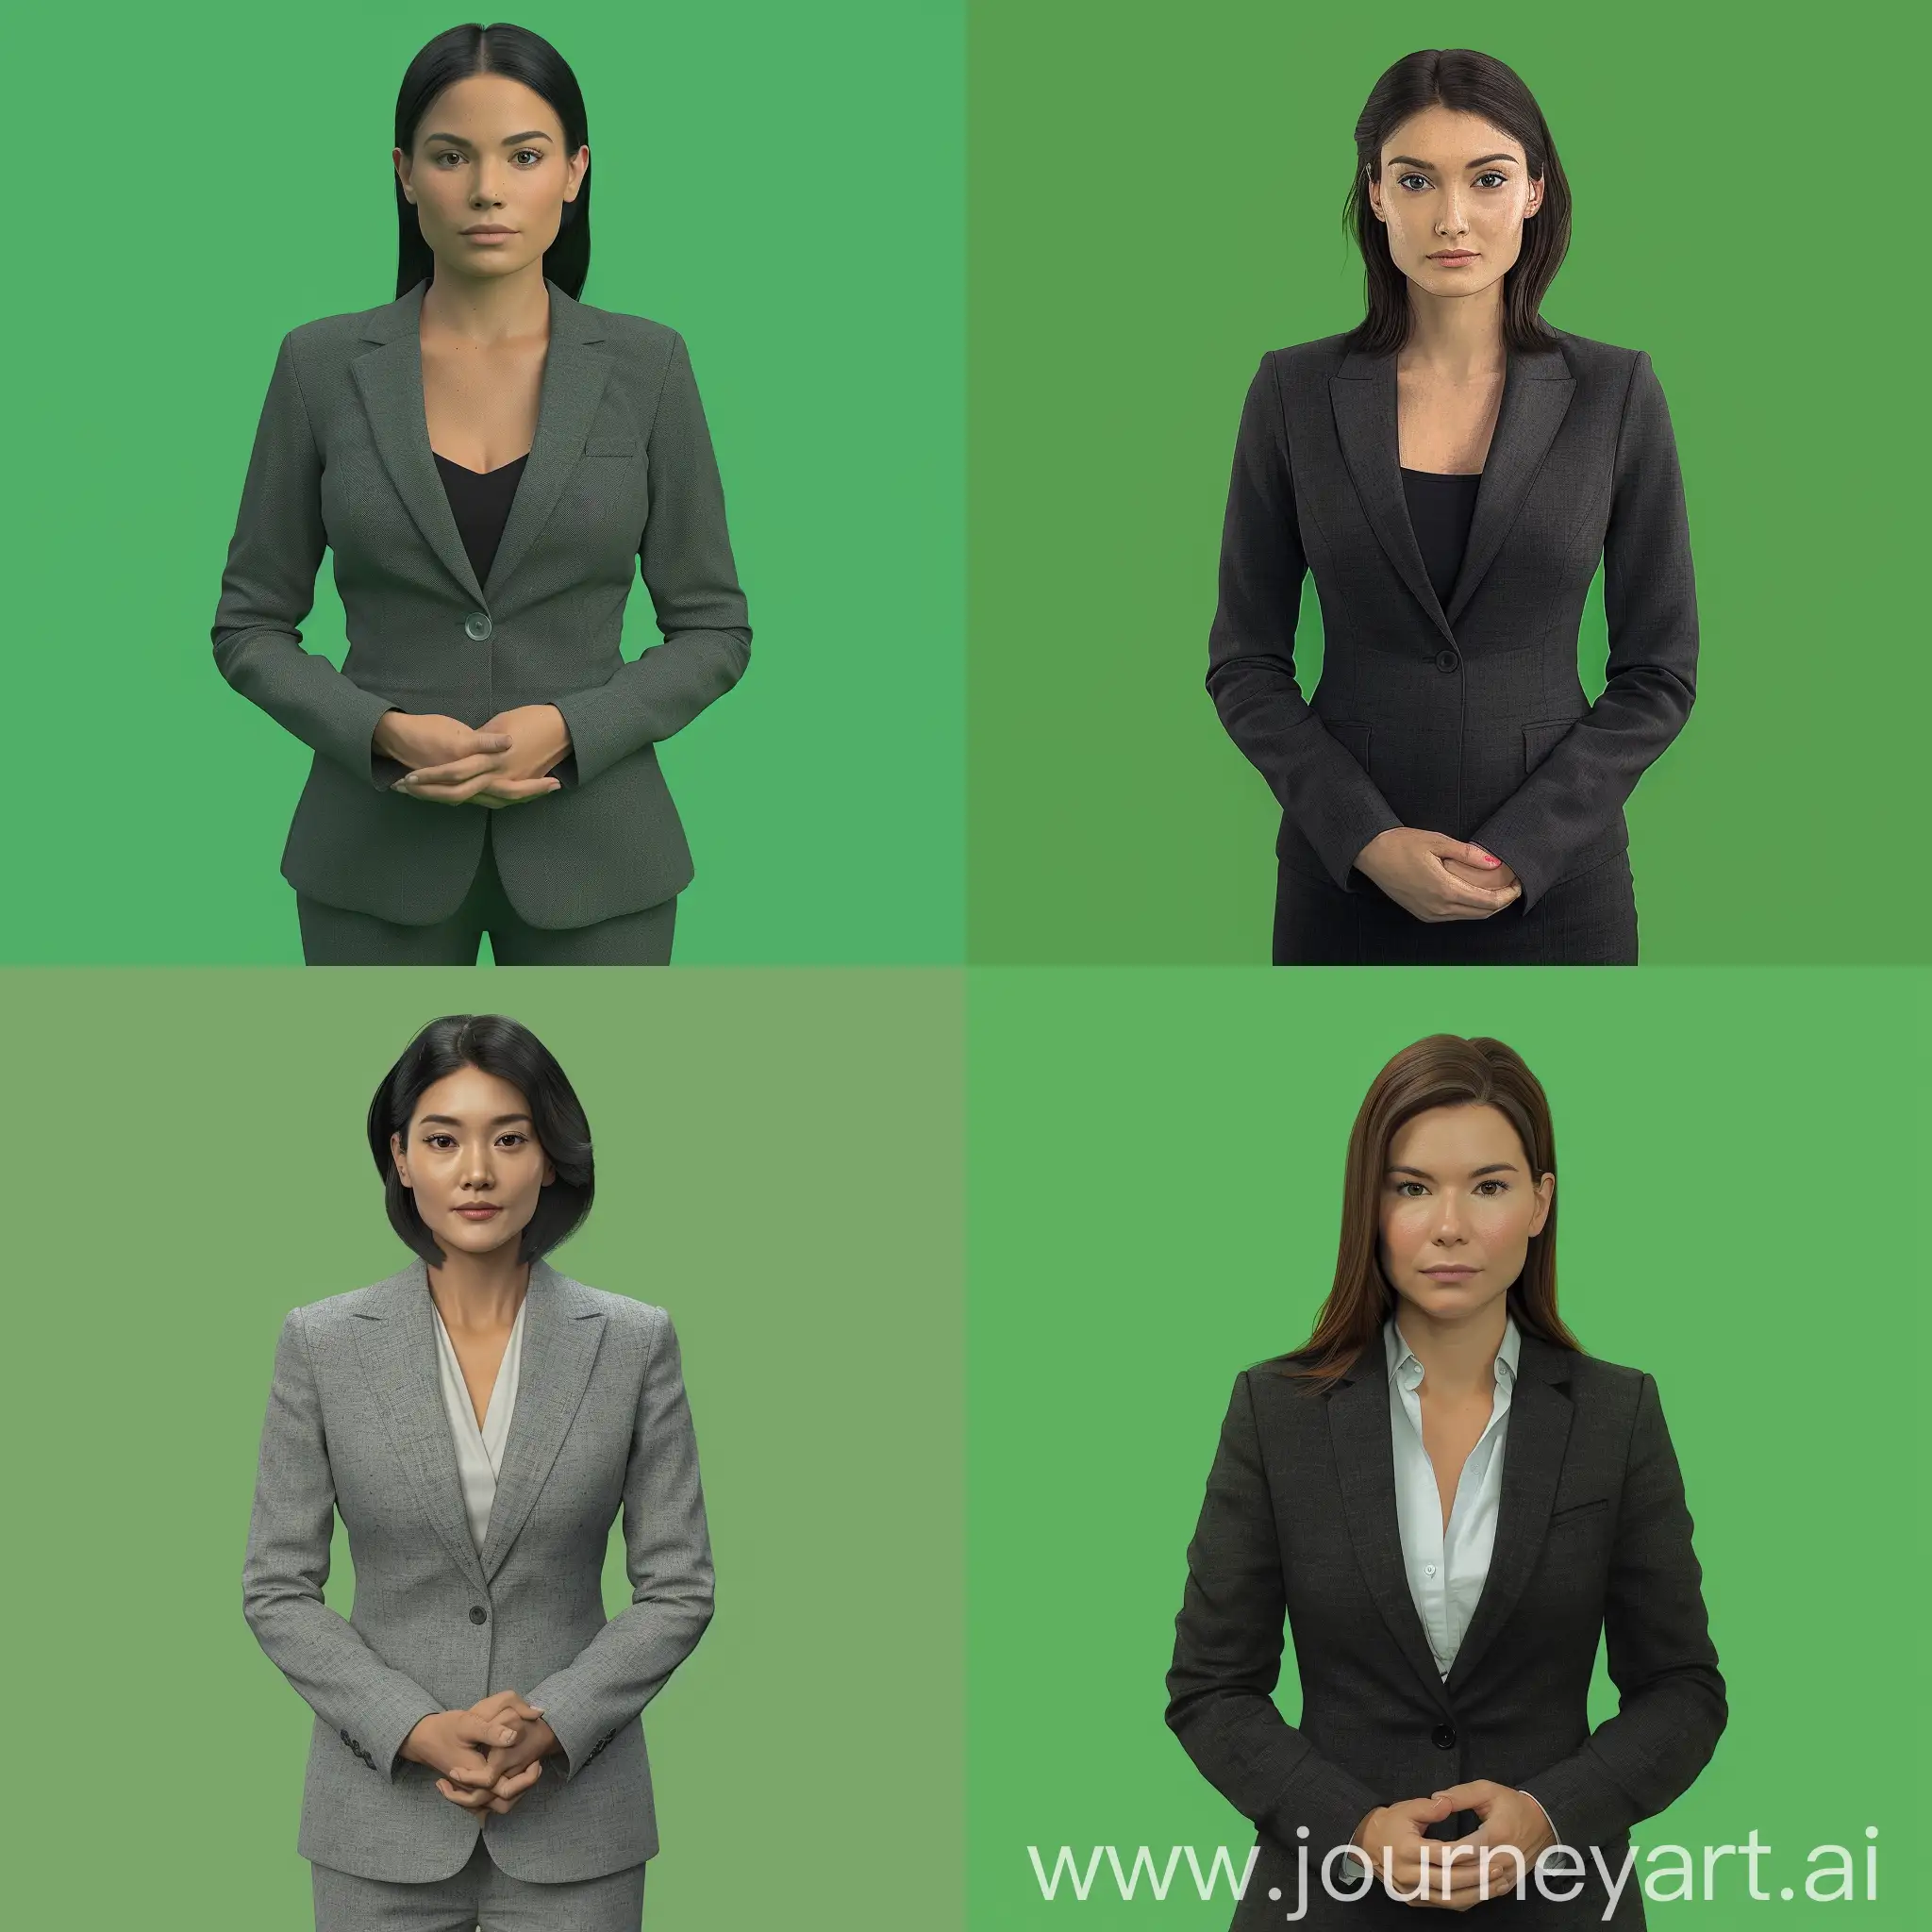 Produce a lifelike portrait ( use a head-to-belly portrait to avoid drawing hands) of a formal female news presenter with appropriate clothing for the news. The presenter is standing upright, still with no movement, in a rested and relaxed position with a natural expression ready to start telling the news. The presenter should have straight hair or neatly styled hair with minimal layers.
Utilize a high-quality, front-facing photograph with well-defined lighting (avoiding any shadows as the light is from the front), also remove reflections.
Ensure that the background is a solid chroma ONE green ONLY color (0x00FF00) without any reflections or variations in hue. 
To facilitate future cropping, ensure even borders with solid colors, without gradients, for both the borders of the person and the solid chroma background.